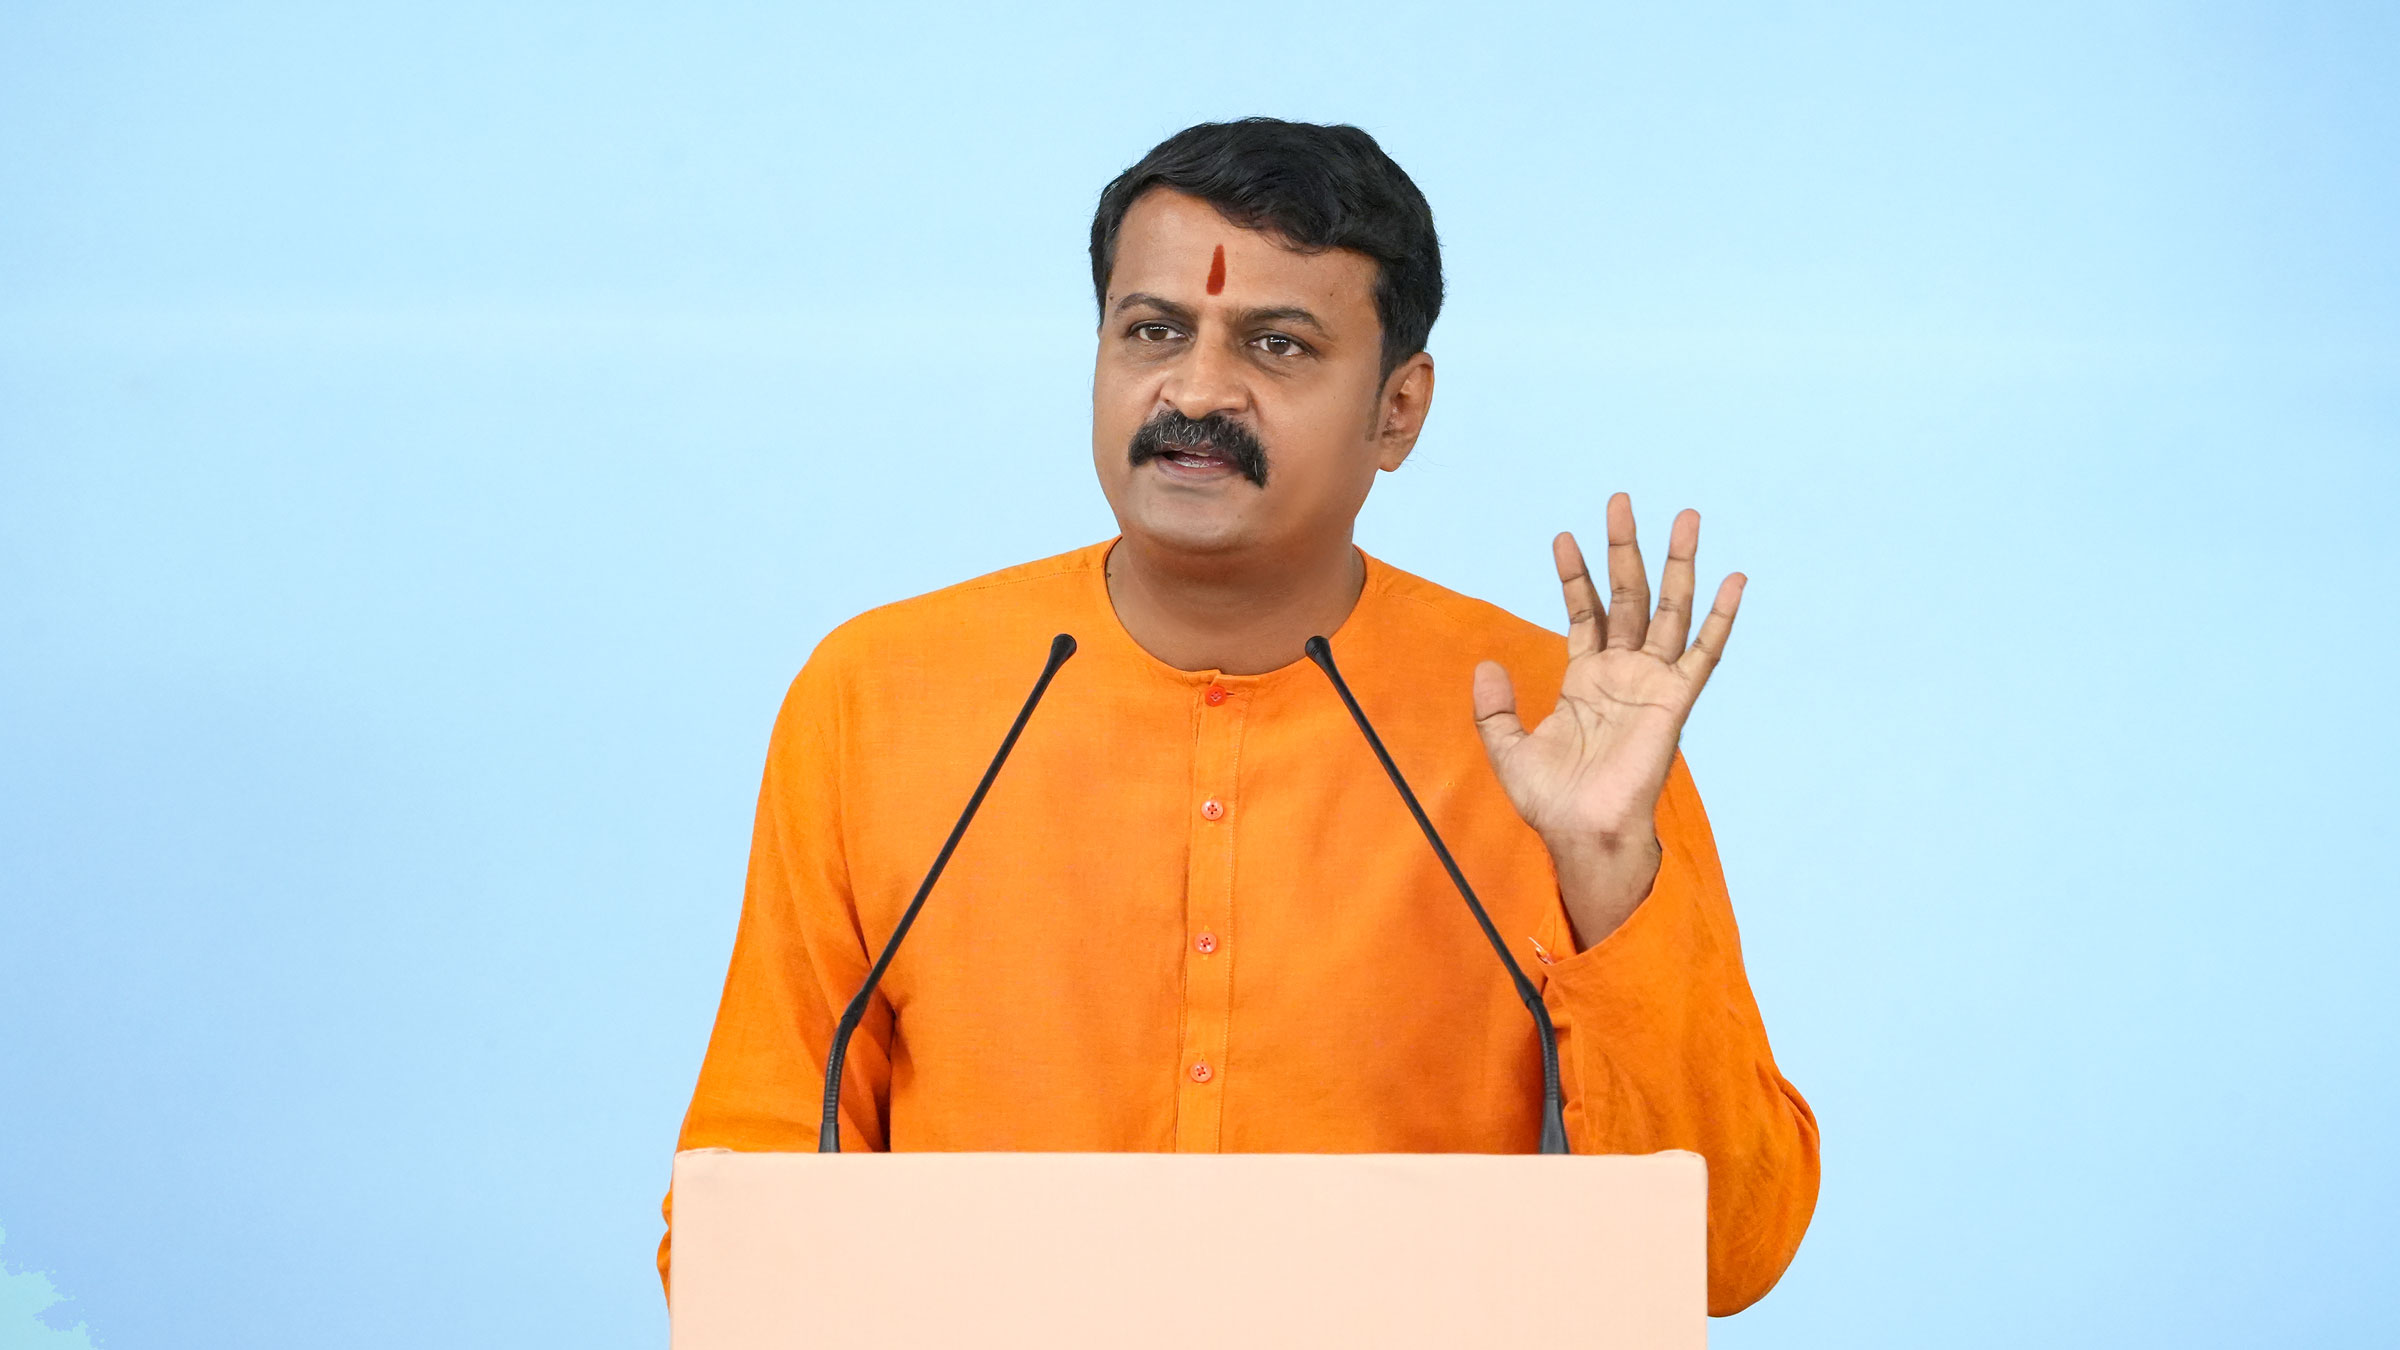 Briefing the attendees on the subject of ‘Intellectual Terrorism’, Adv. Virendra Ichalkaranjikar (President, Hindu Vidhidnya Parishad) asked, “Devout Hindus are declared terrorists, but when will such people be asked – How many have been killed by Leftists so far ?”